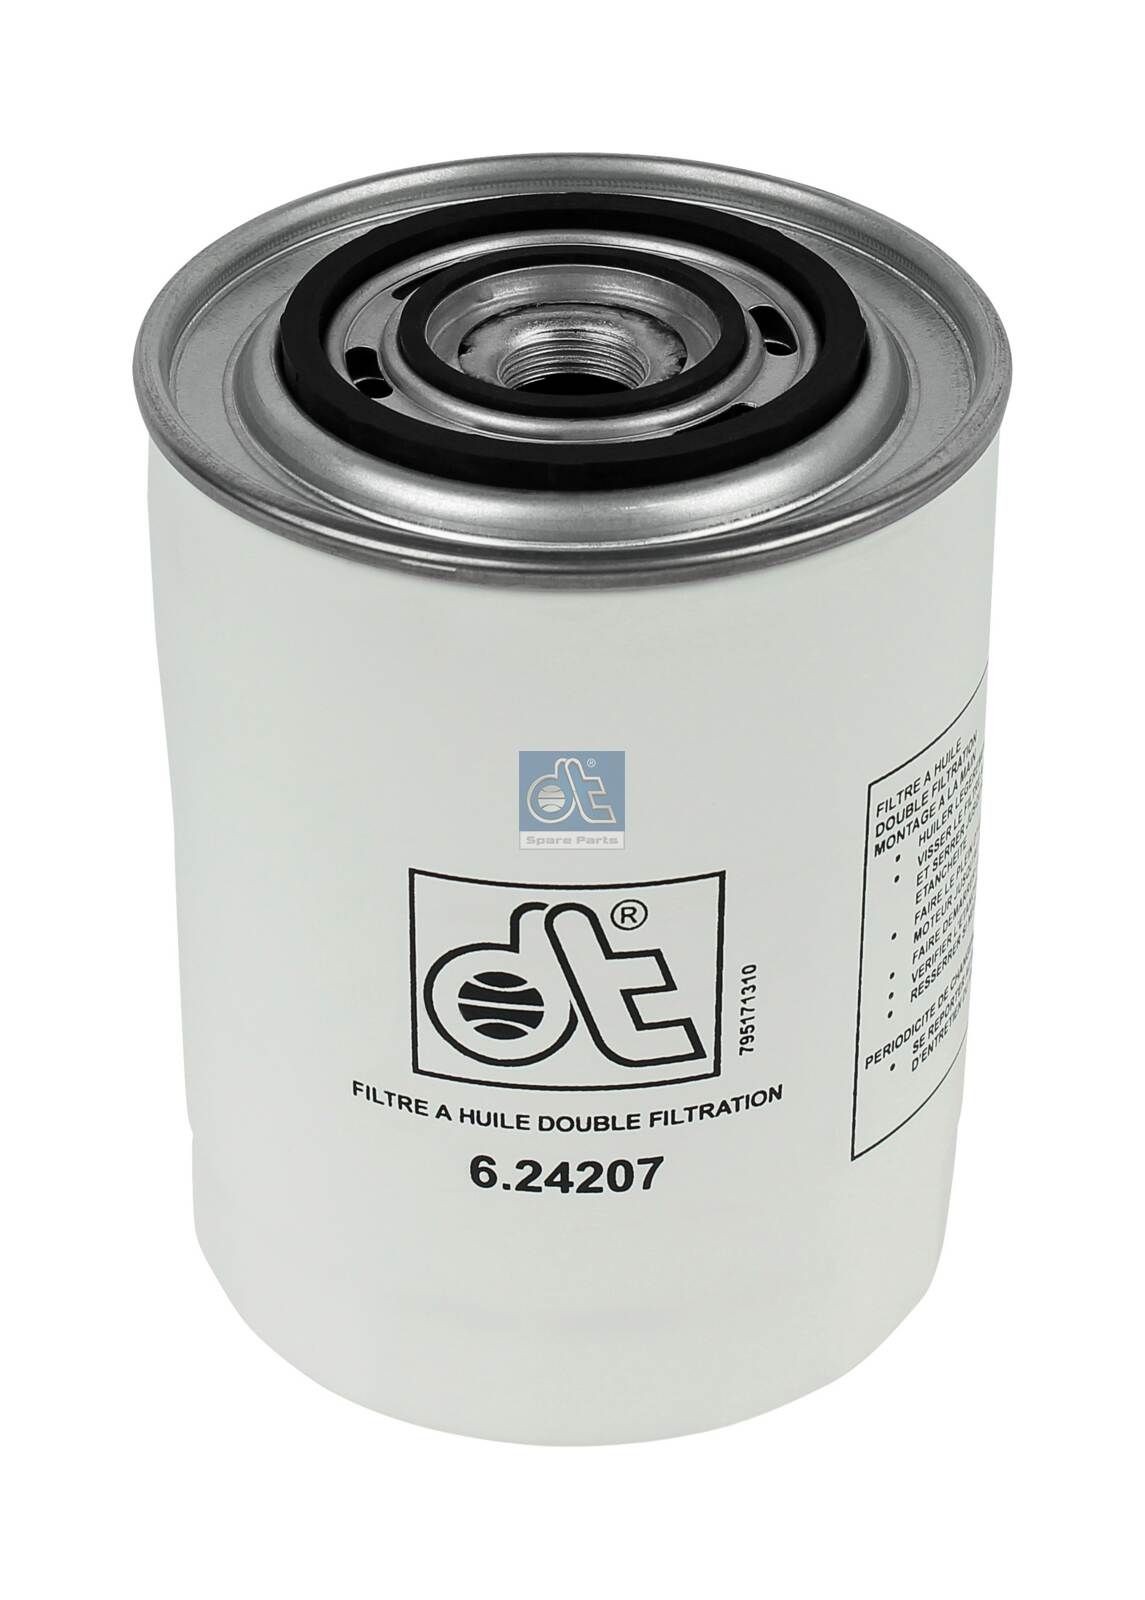 WP 1144 DT Spare Parts 6.24207 Oil filter 71713782